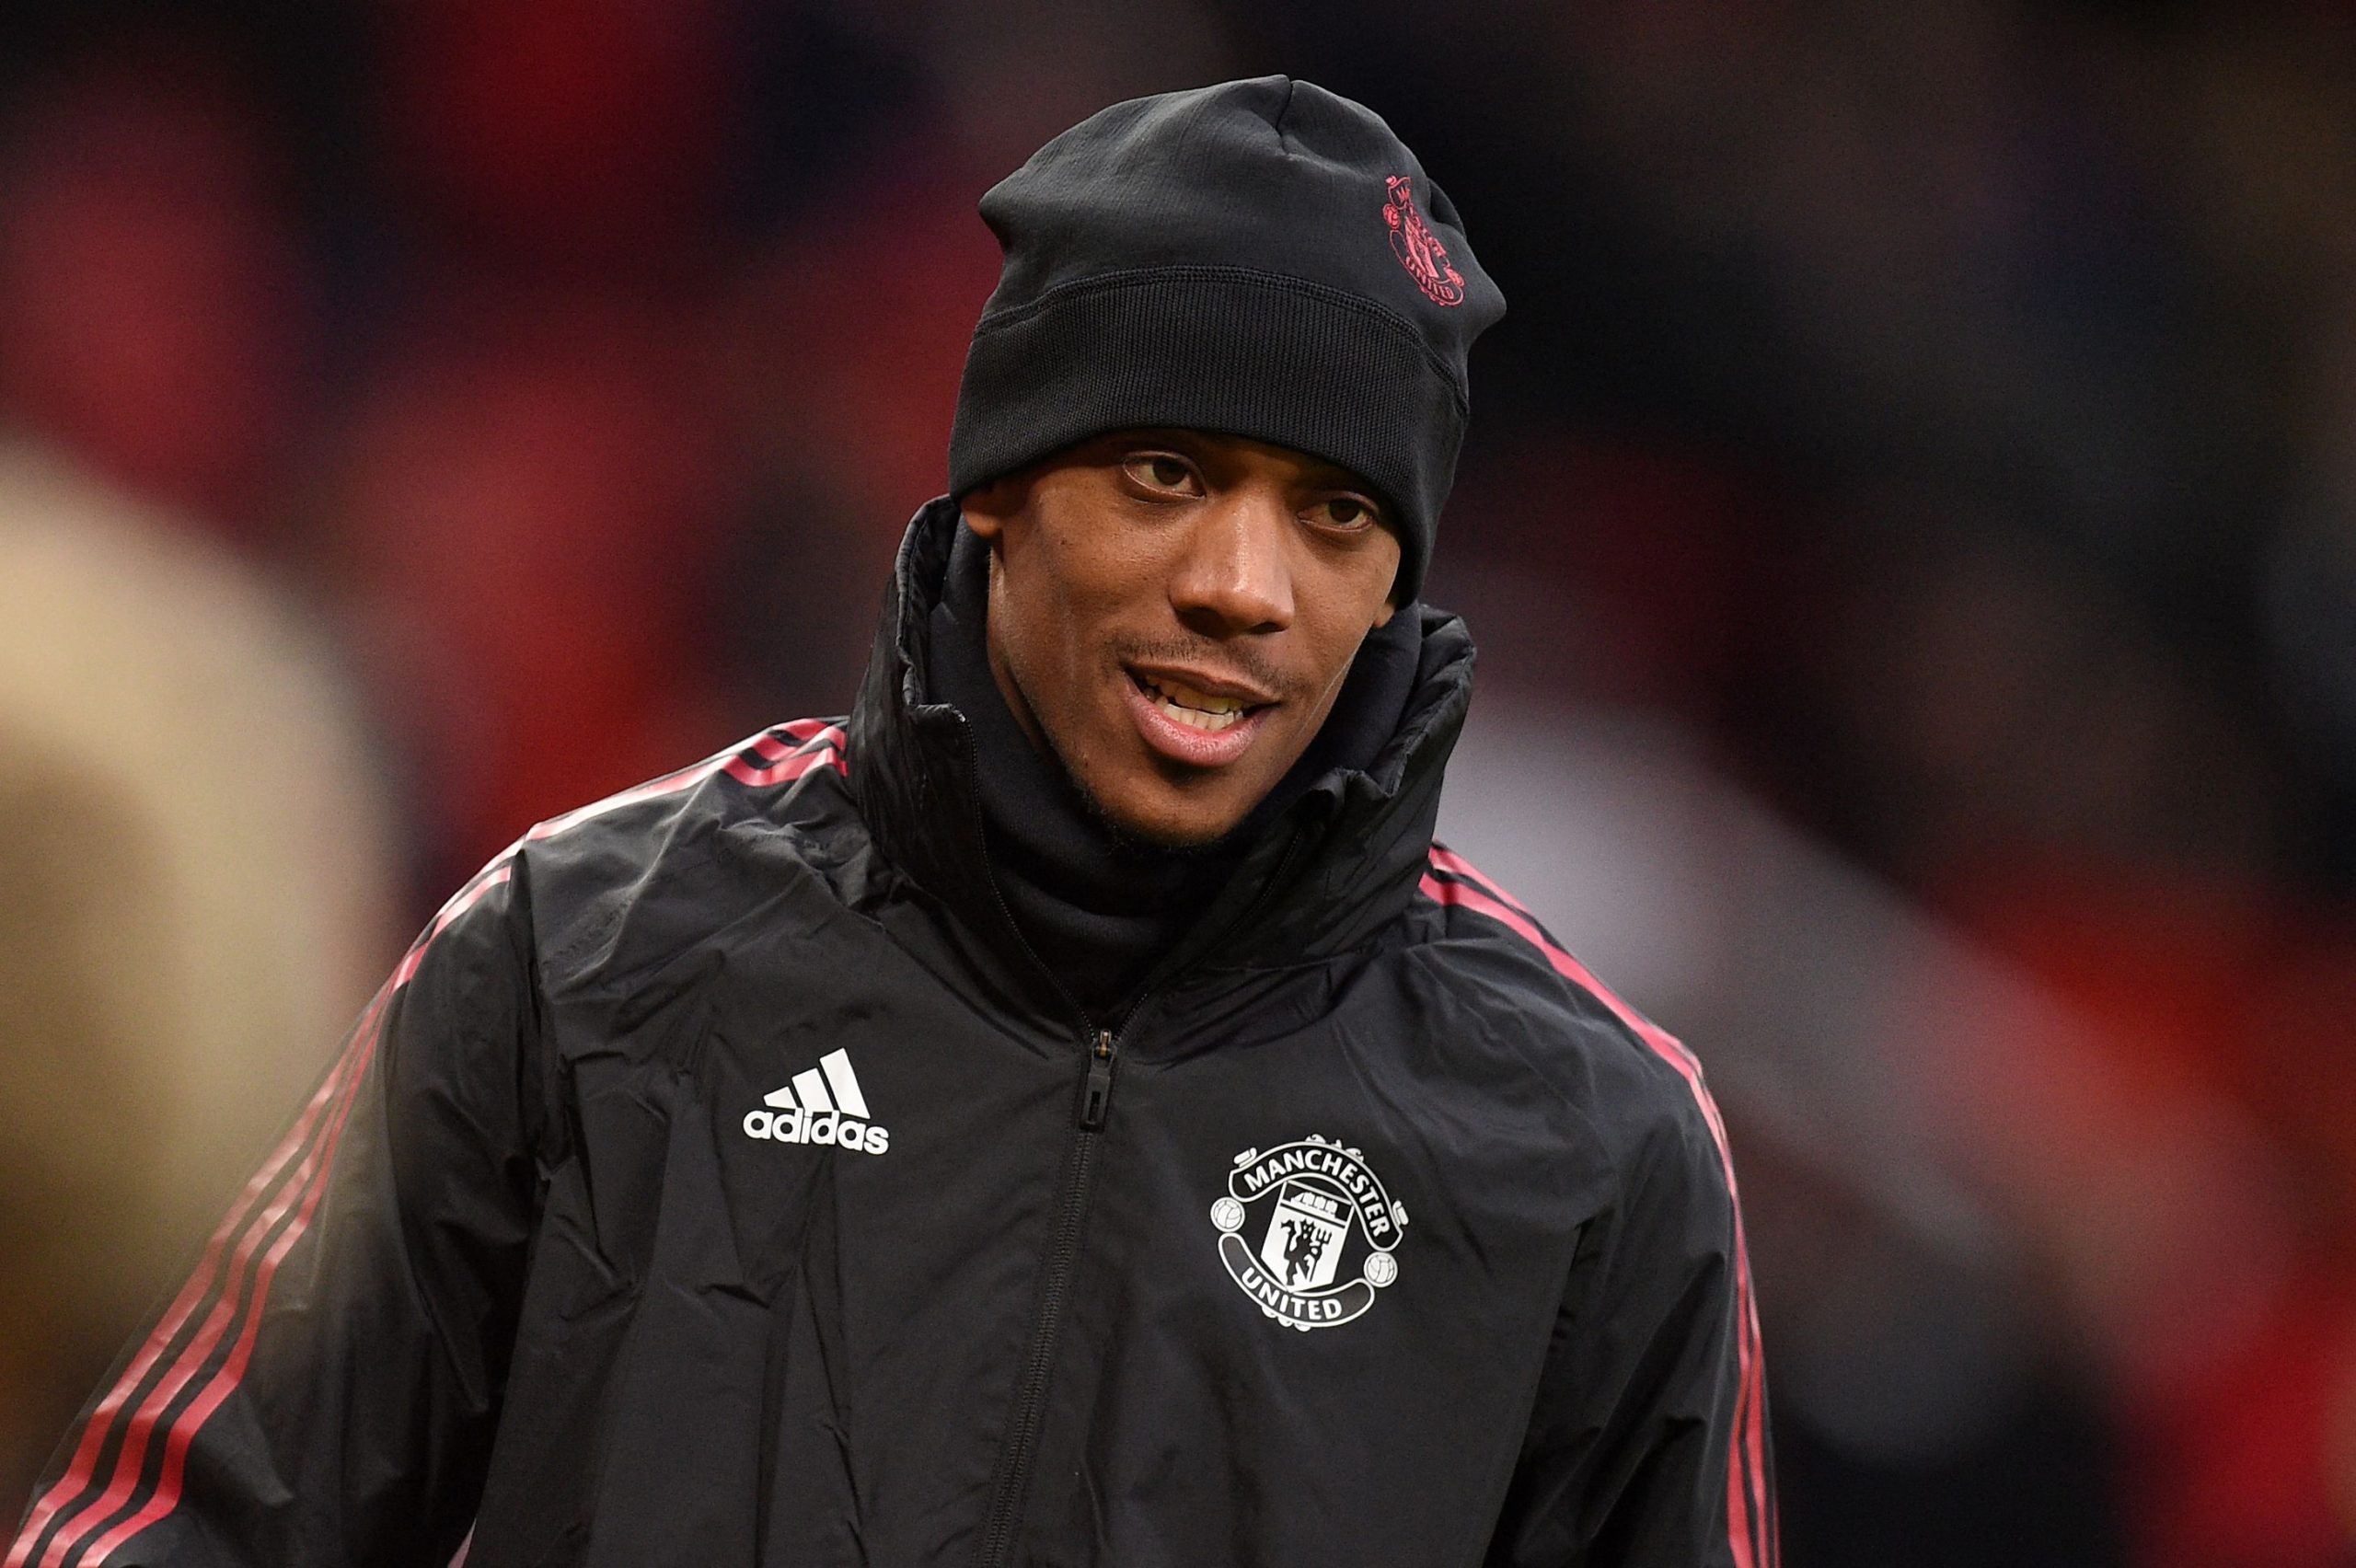 Man United star, Anthony Martial, in training. (Photo by OLI SCARFF/AFP via Getty Images)